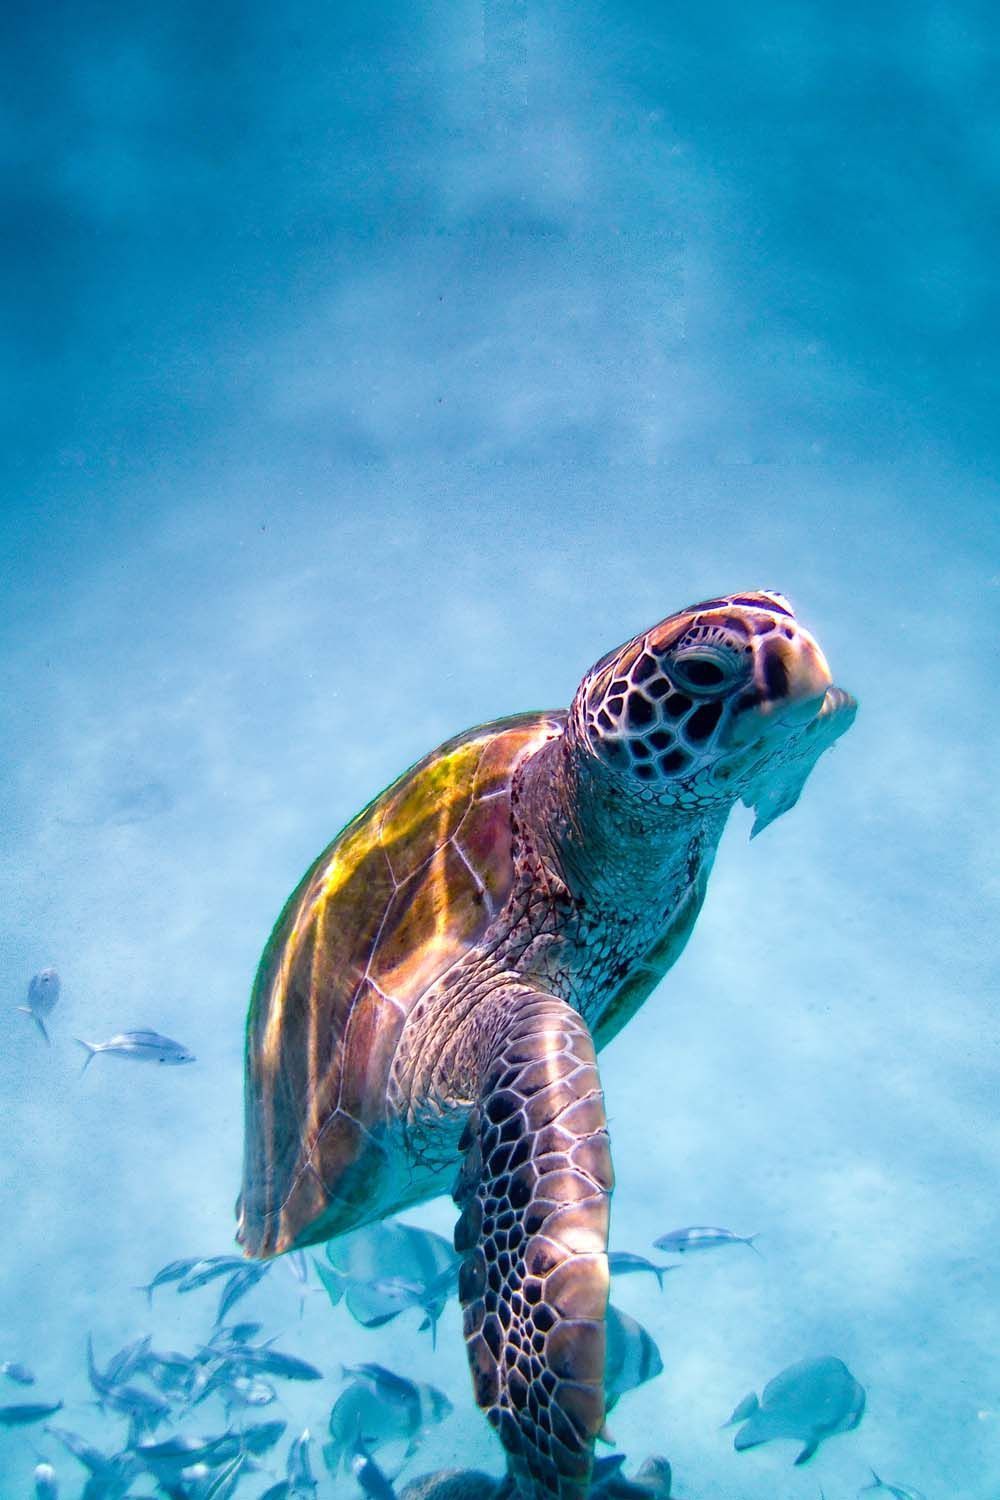 A turtle swimming in the ocean with fish around it - Sea turtle, turtle